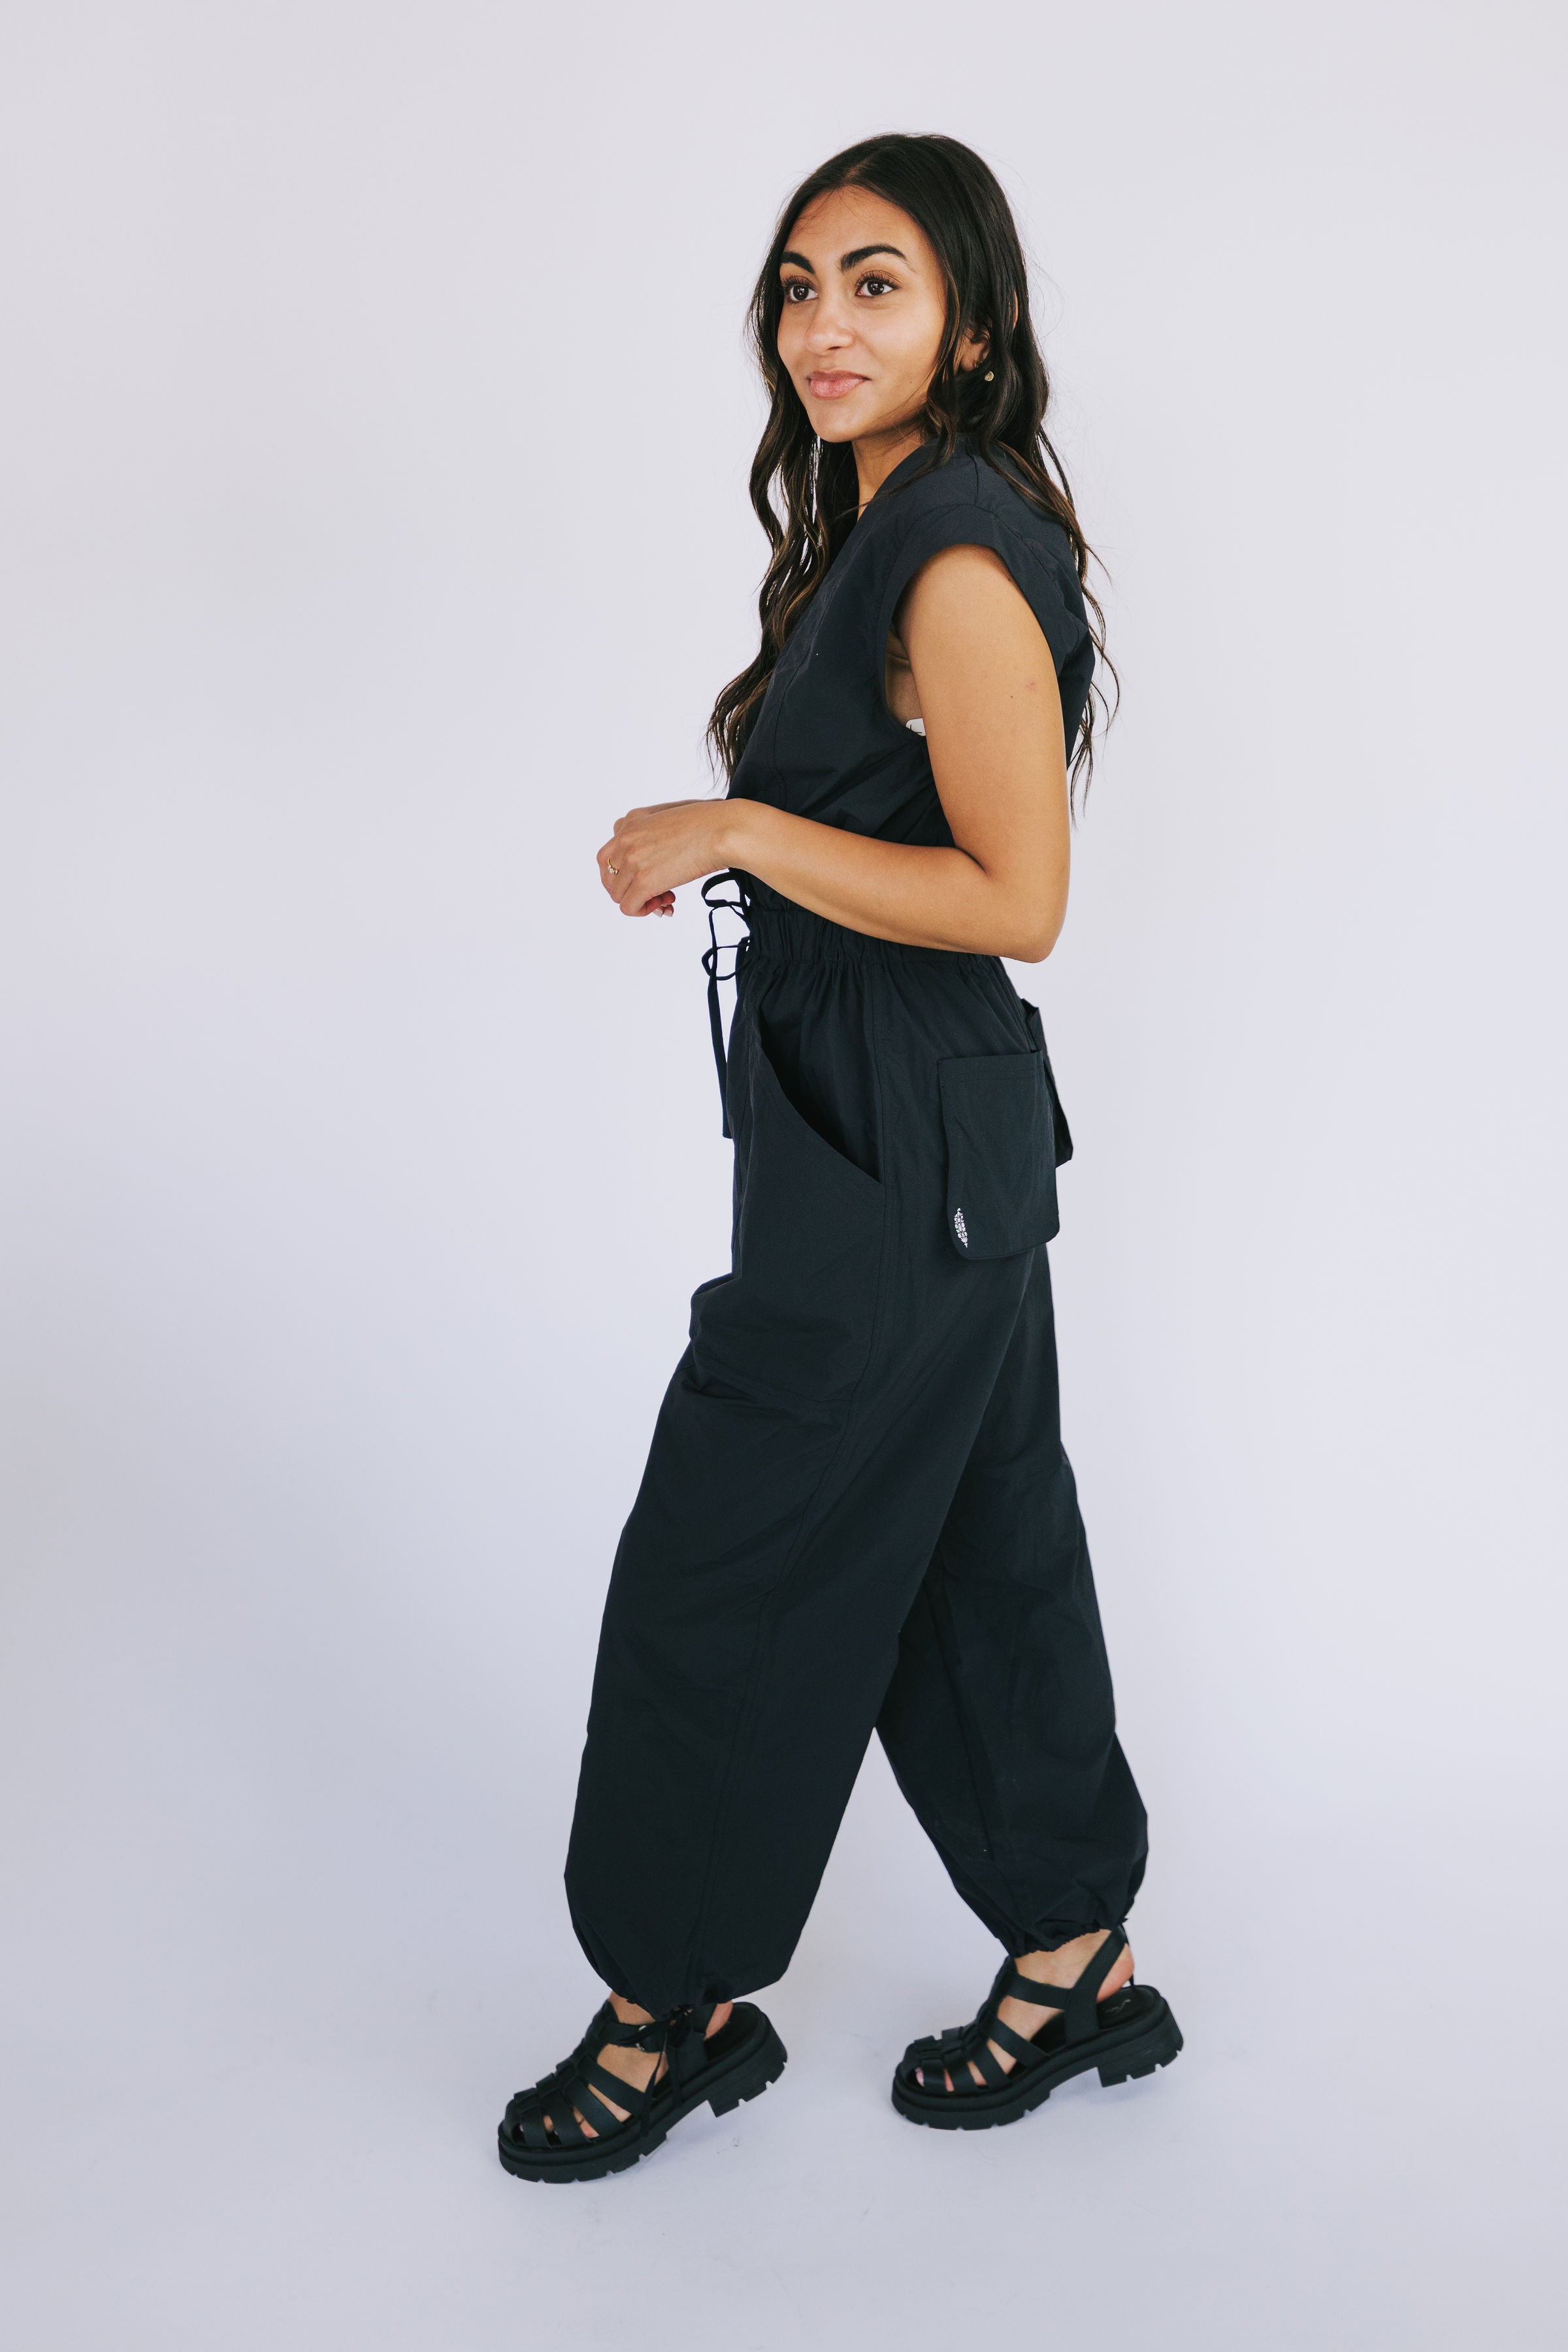 FP Movement by Free People, Pants & Jumpsuits